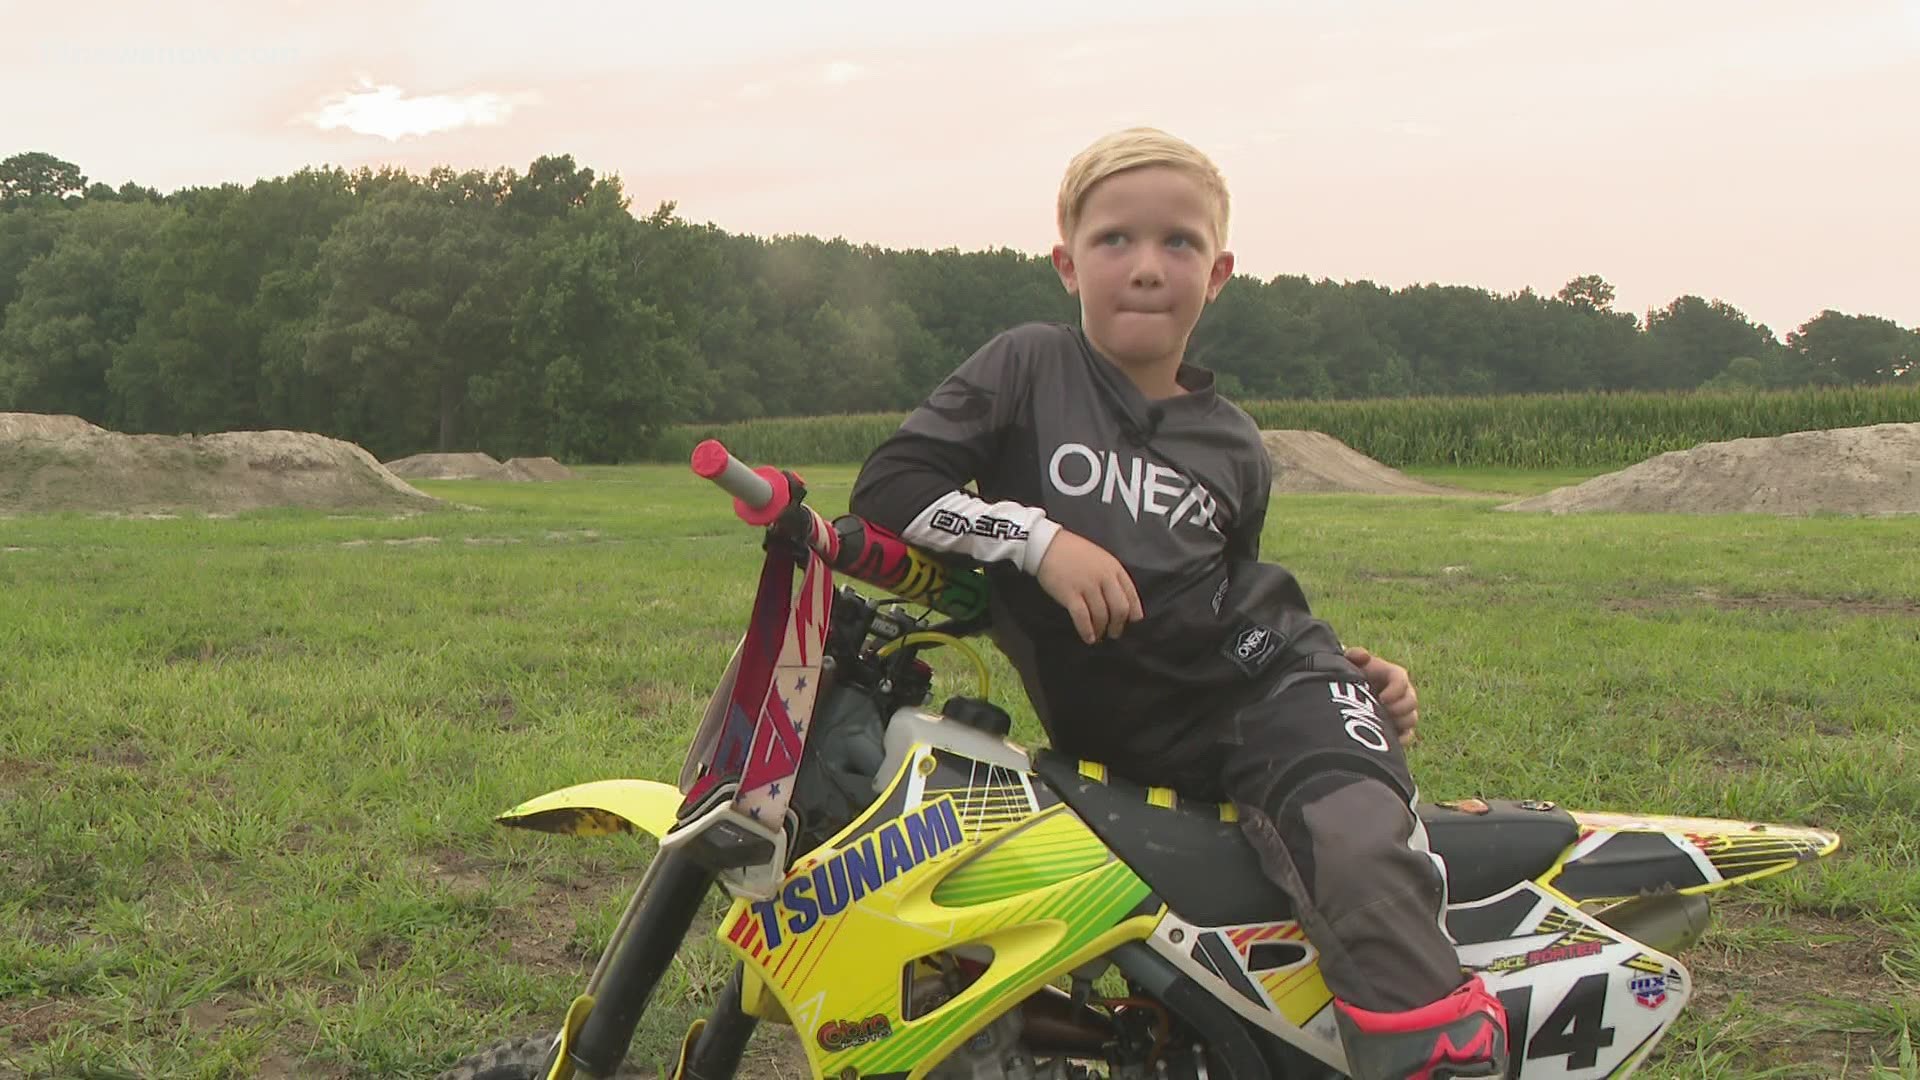 Motocross phenom headed to amateur national championships 13newsnow